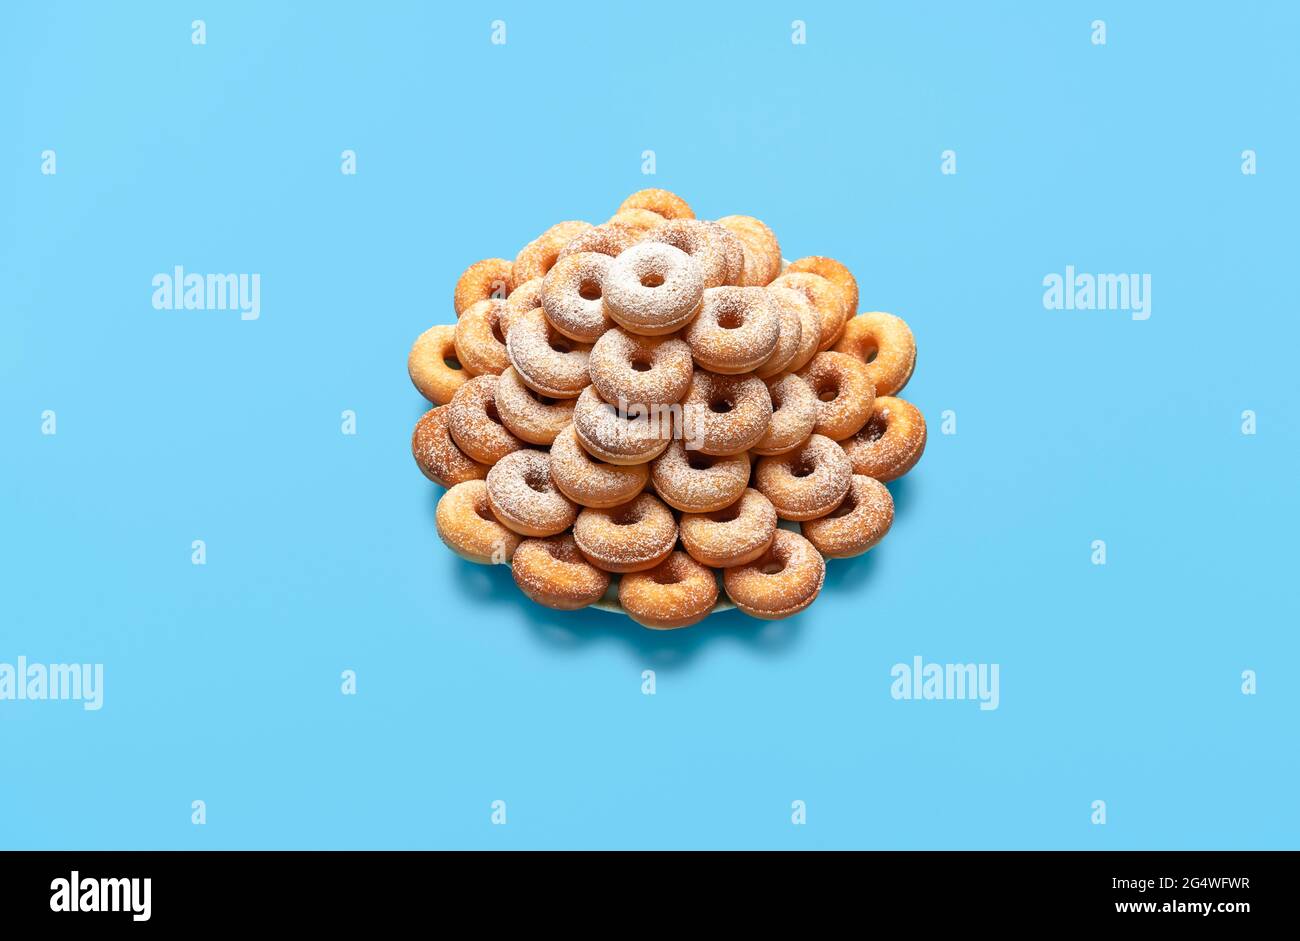 Homemade donuts with powder sugar, on a plate, isolated on a blue-colored background. Freshly baked mini doughnuts, ready to serve on a blue table. Stock Photo